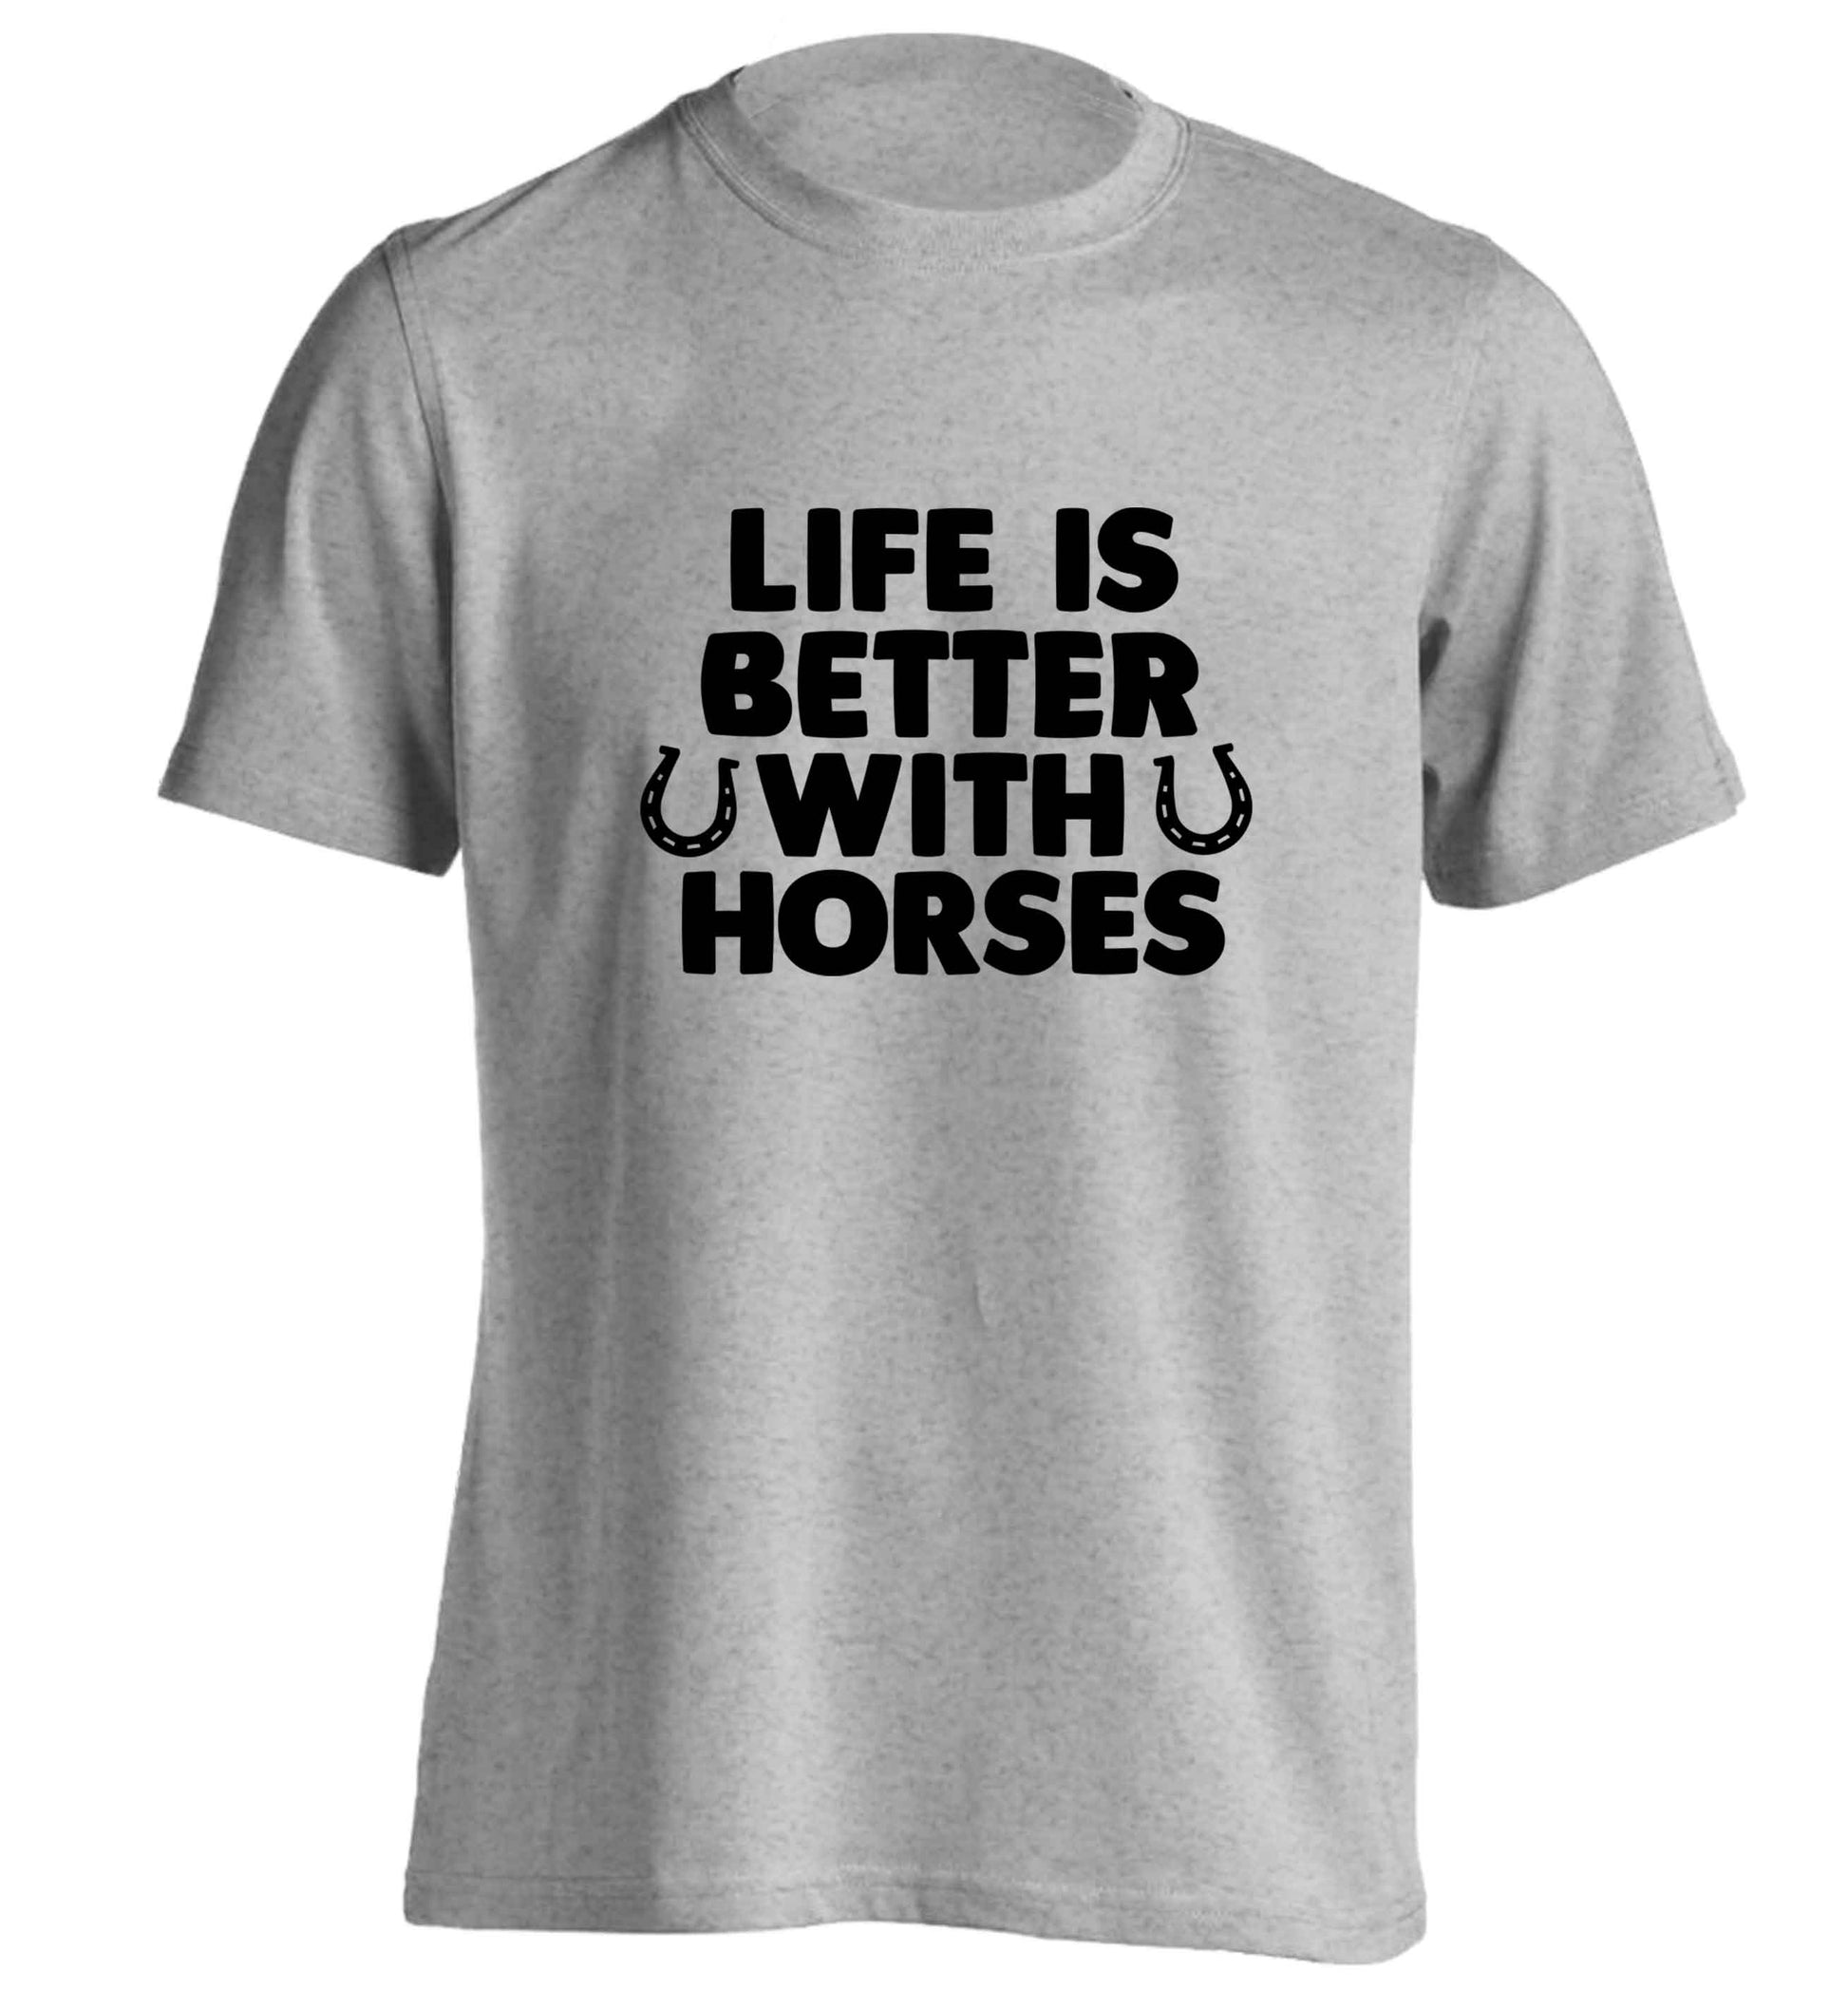 Life is better with horses adults unisex grey Tshirt 2XL